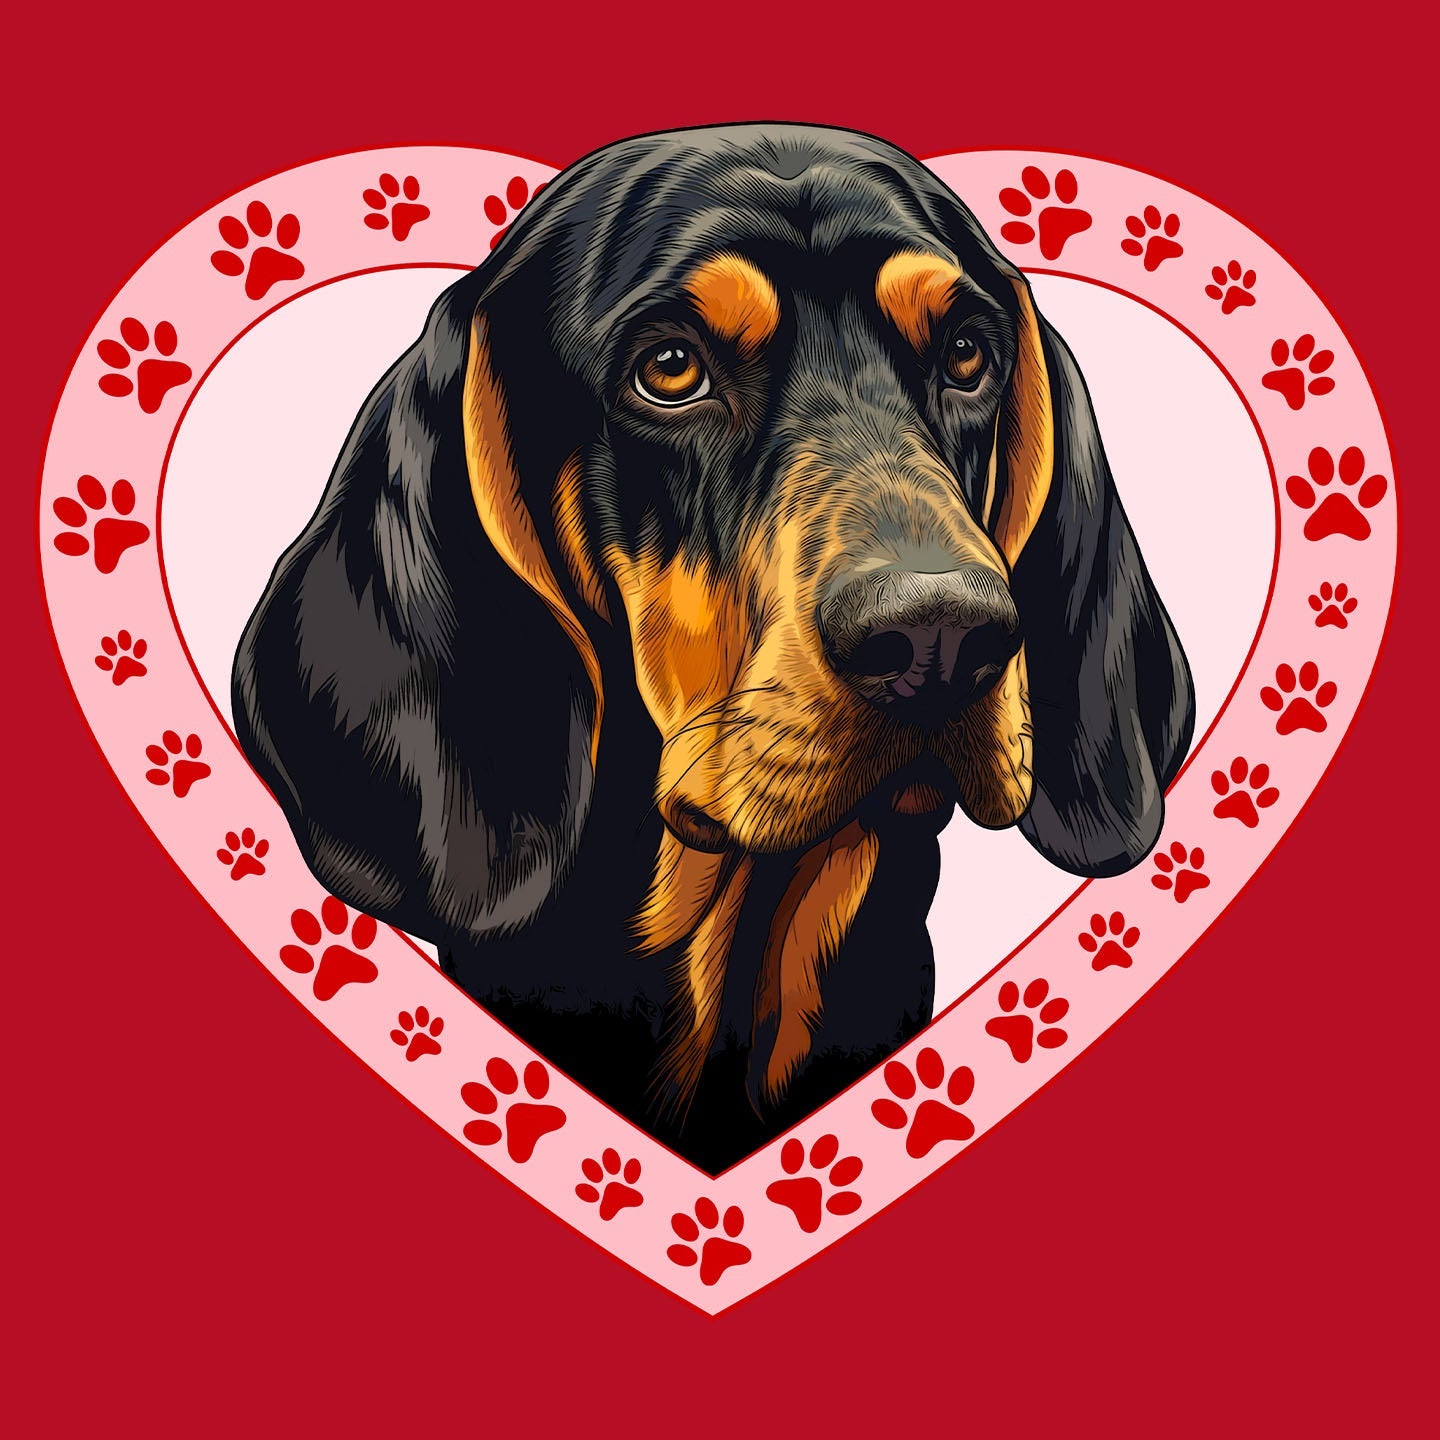 Black and Tan Coonhound Illustration In Heart - Women's V-Neck T-Shirt